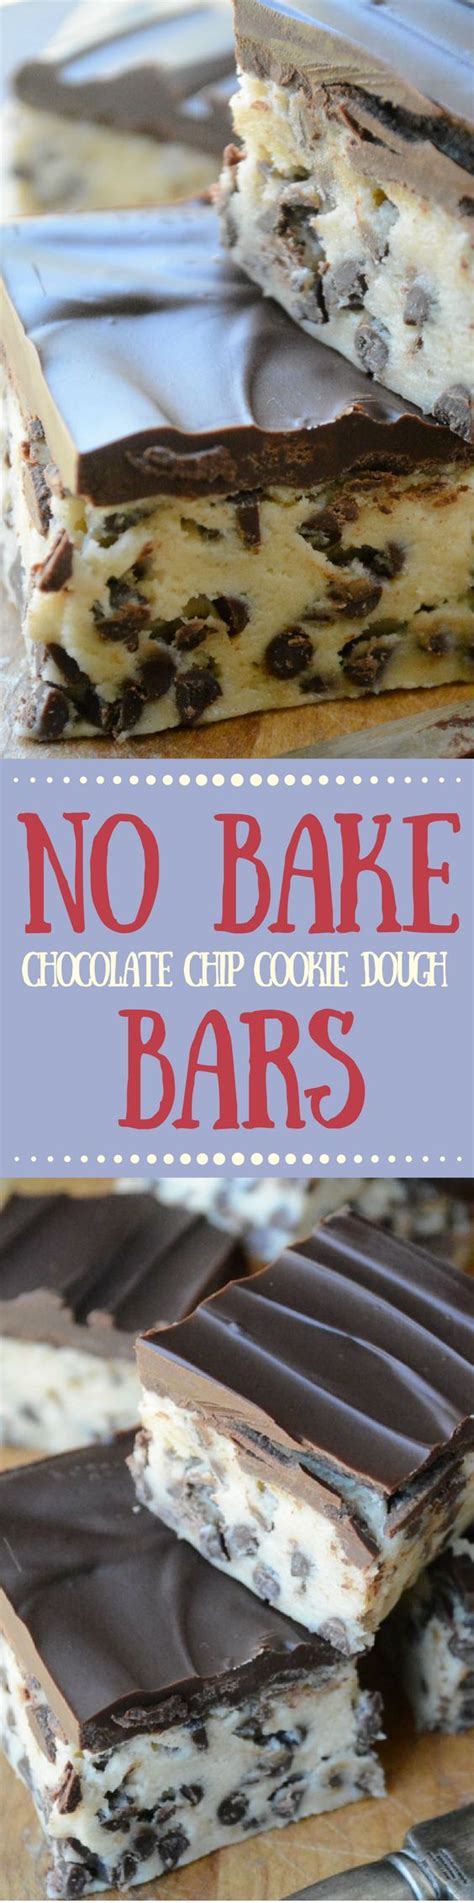 Your Refrigerator Does All The Work For These No Bake Chocolate Chip